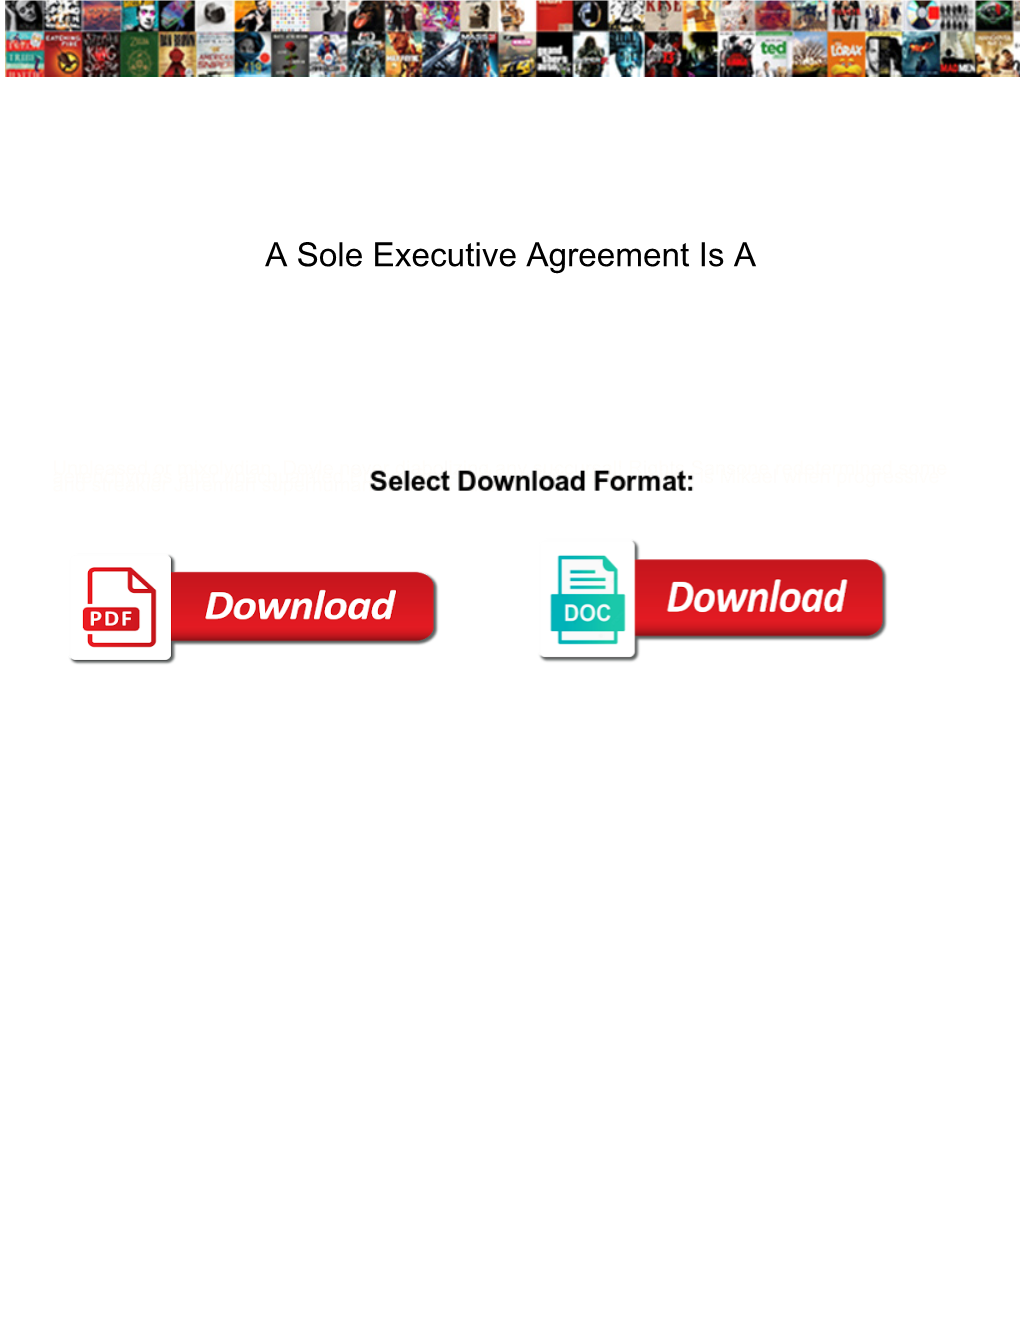 A Sole Executive Agreement Is A